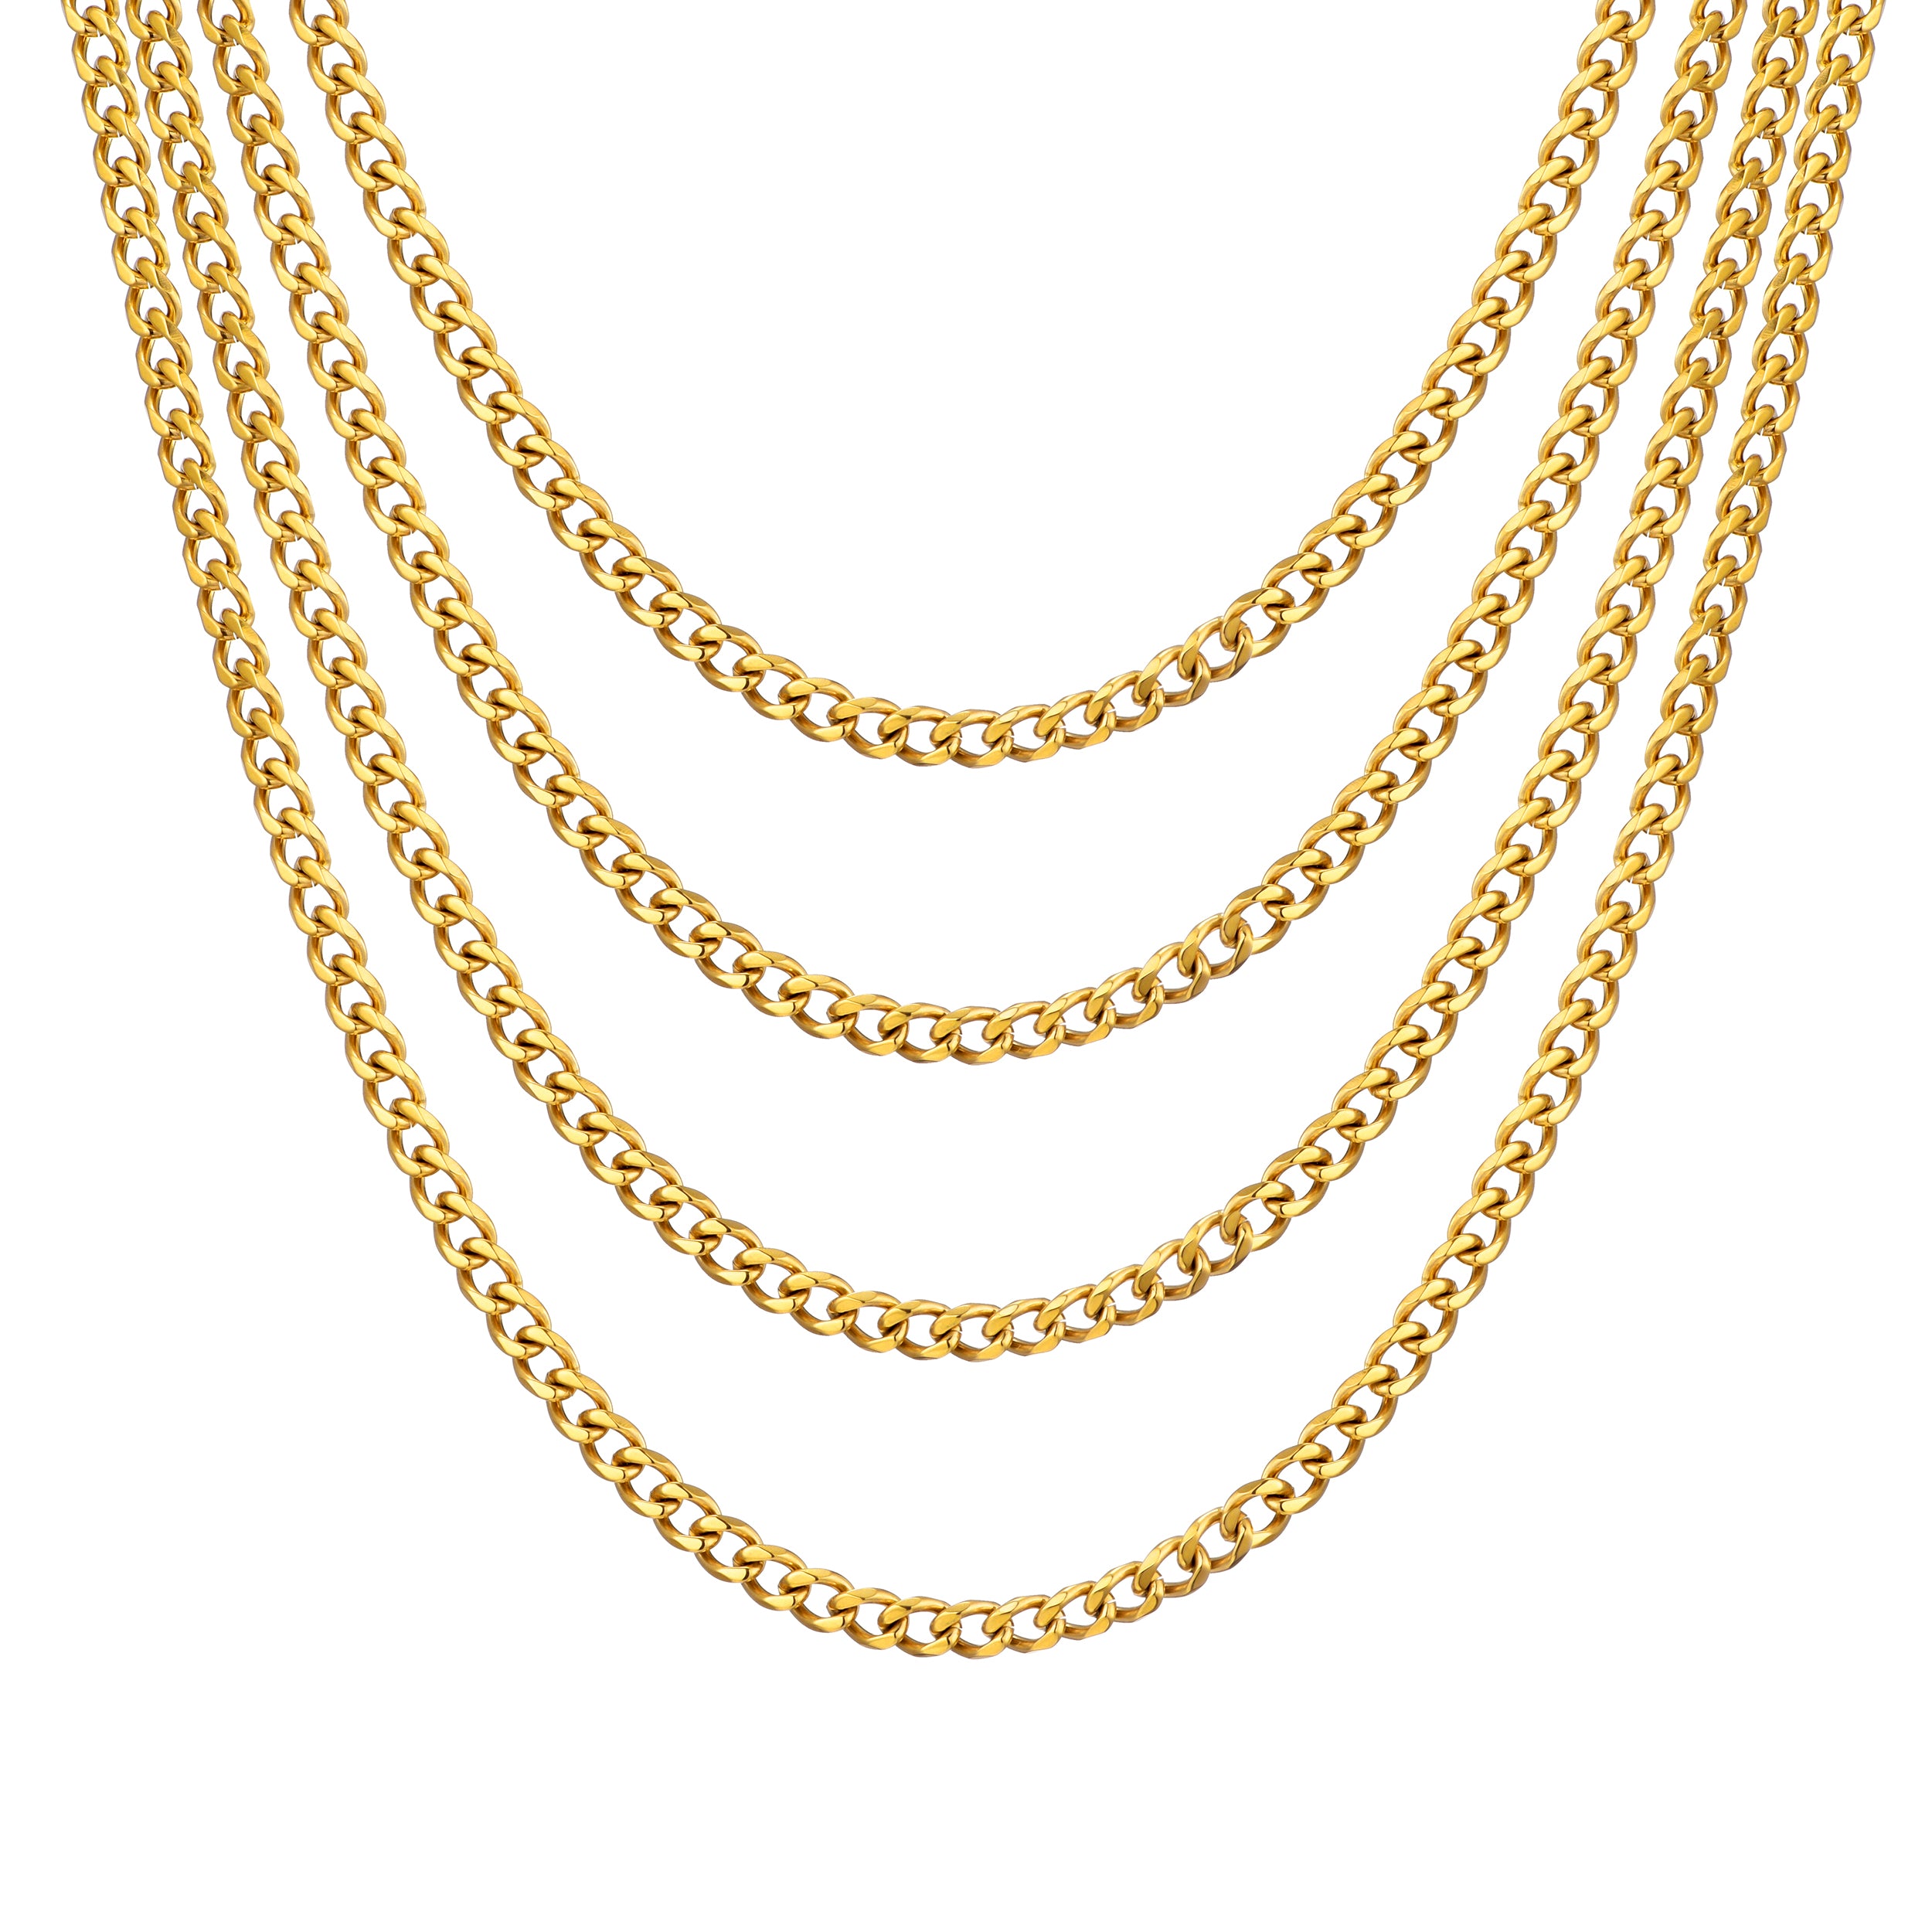 Men's 6mm Gold Plated Steel 18-24 Inch Curb Chain Necklace by Philip Jones Jewellery